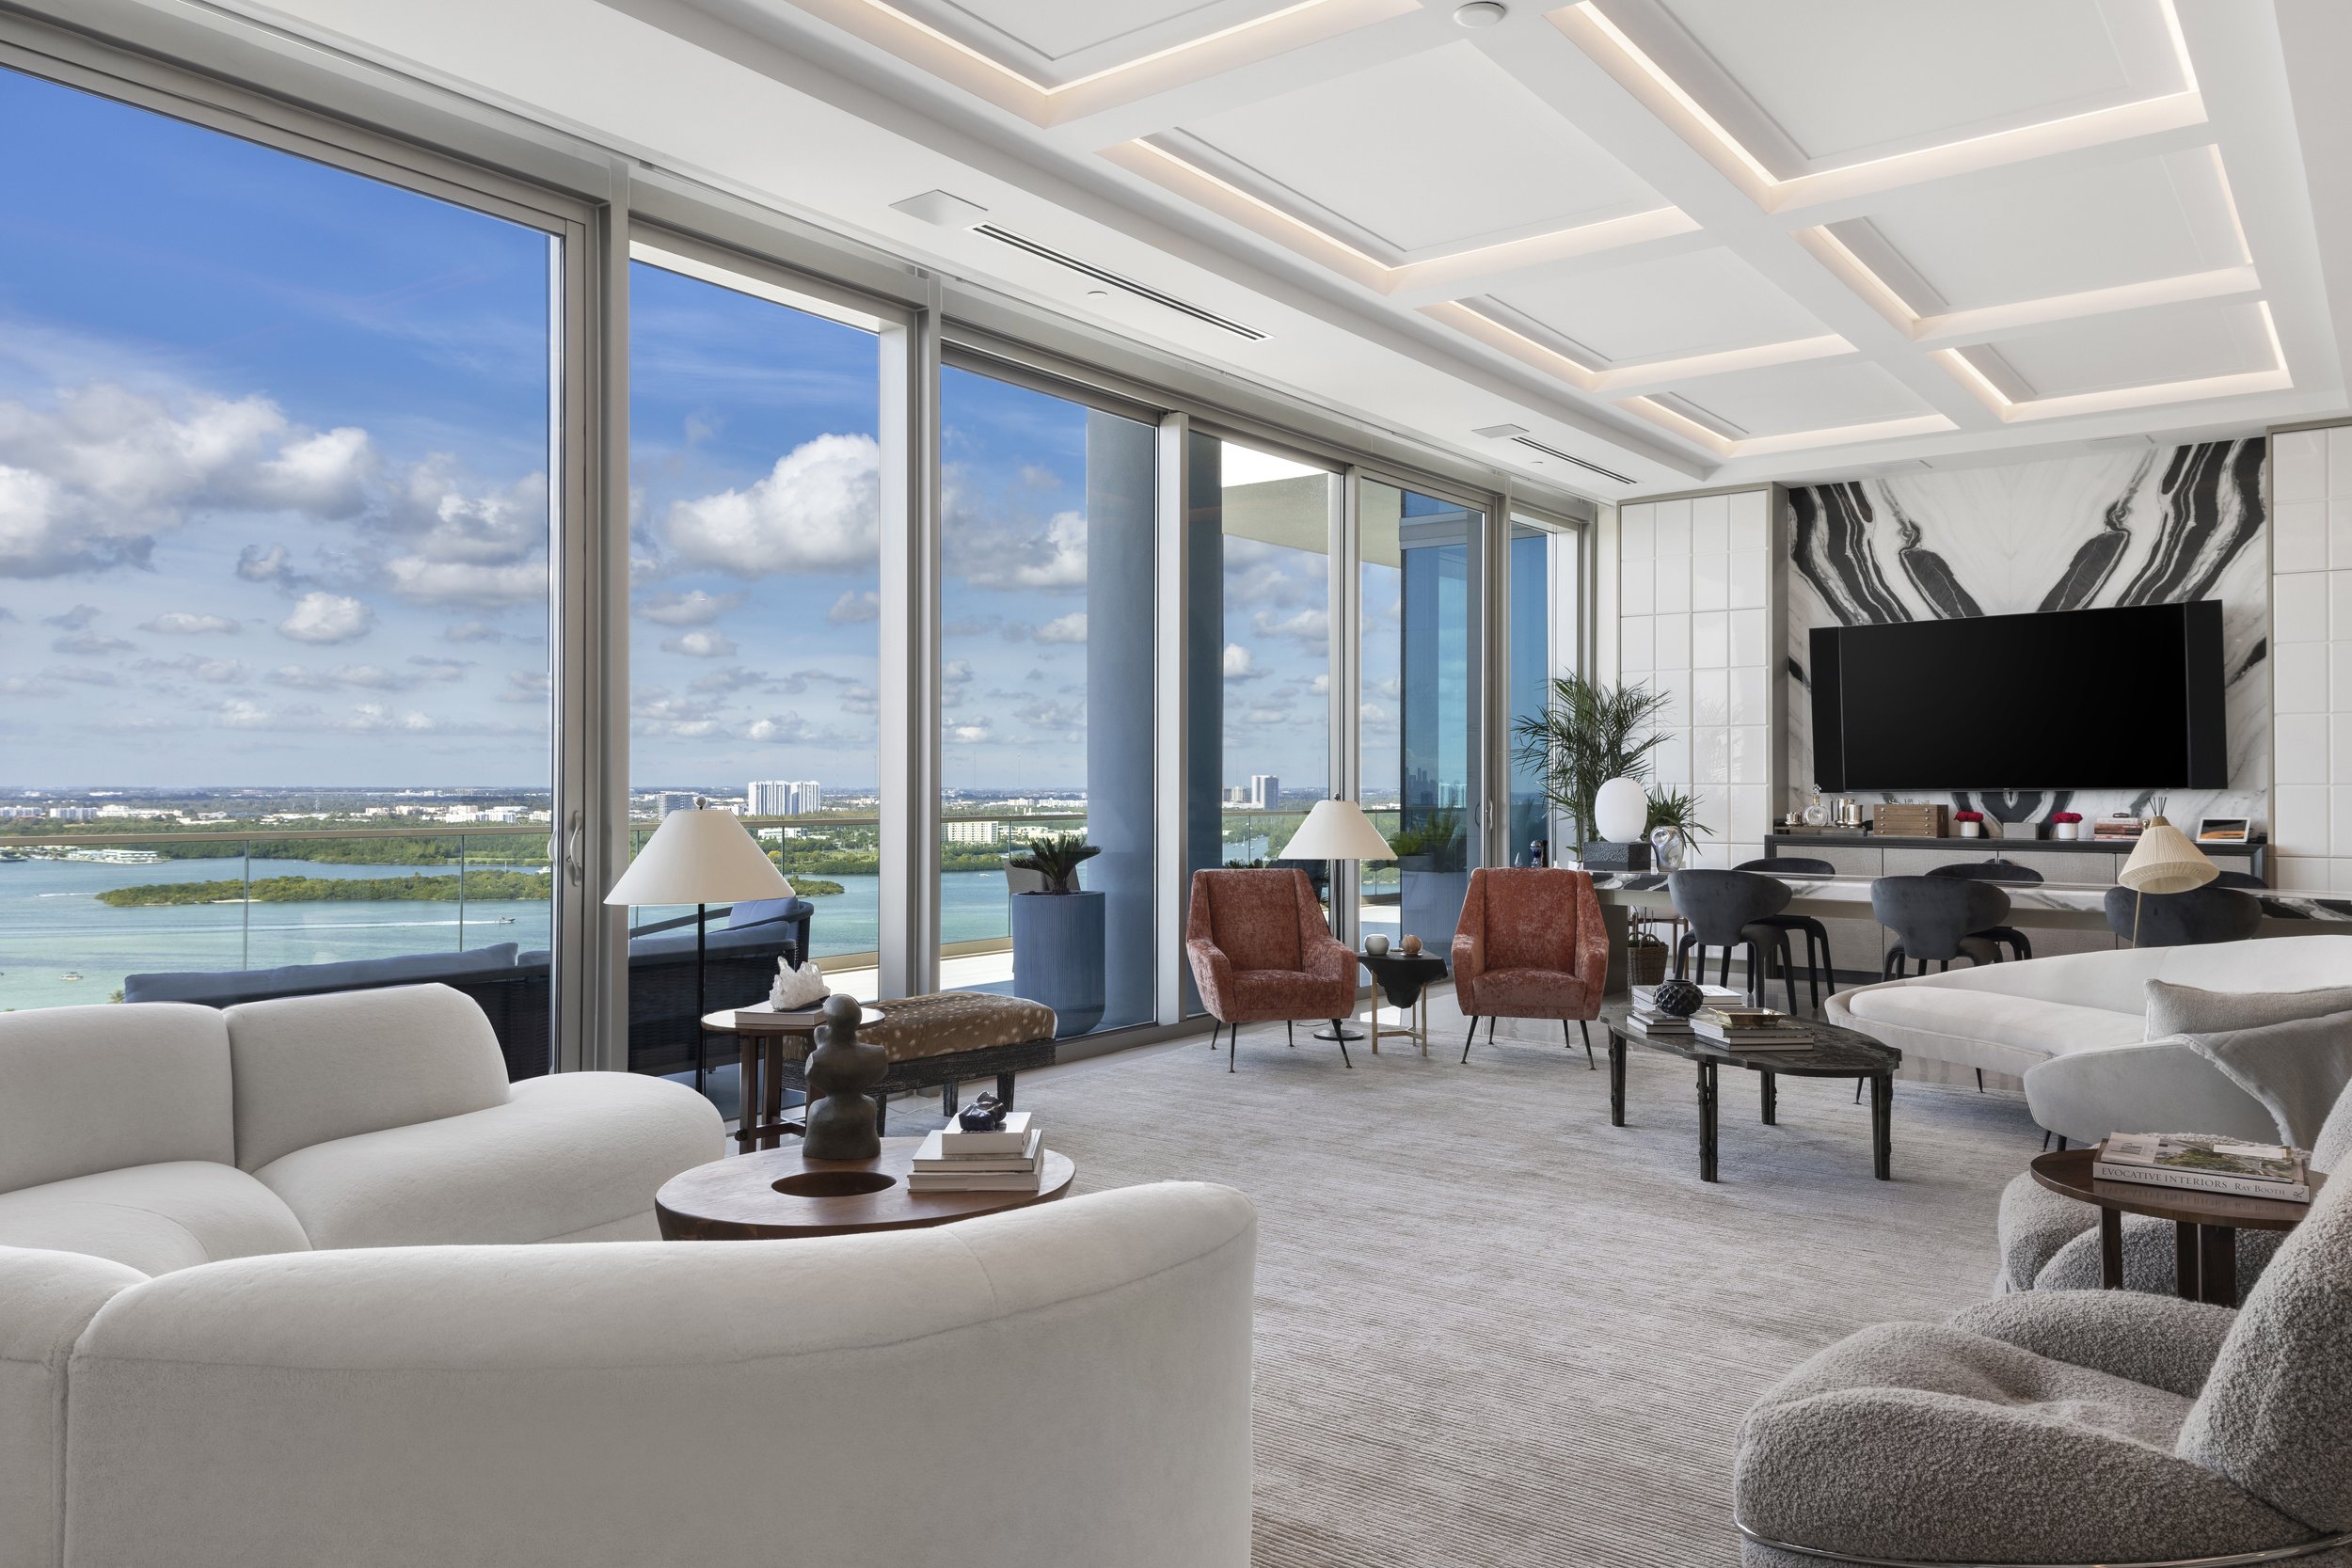 Step Inside This Two-Story Crown Jewel Penthouse At Oceana Bal Harbour Asking $25 Million 218.jpg